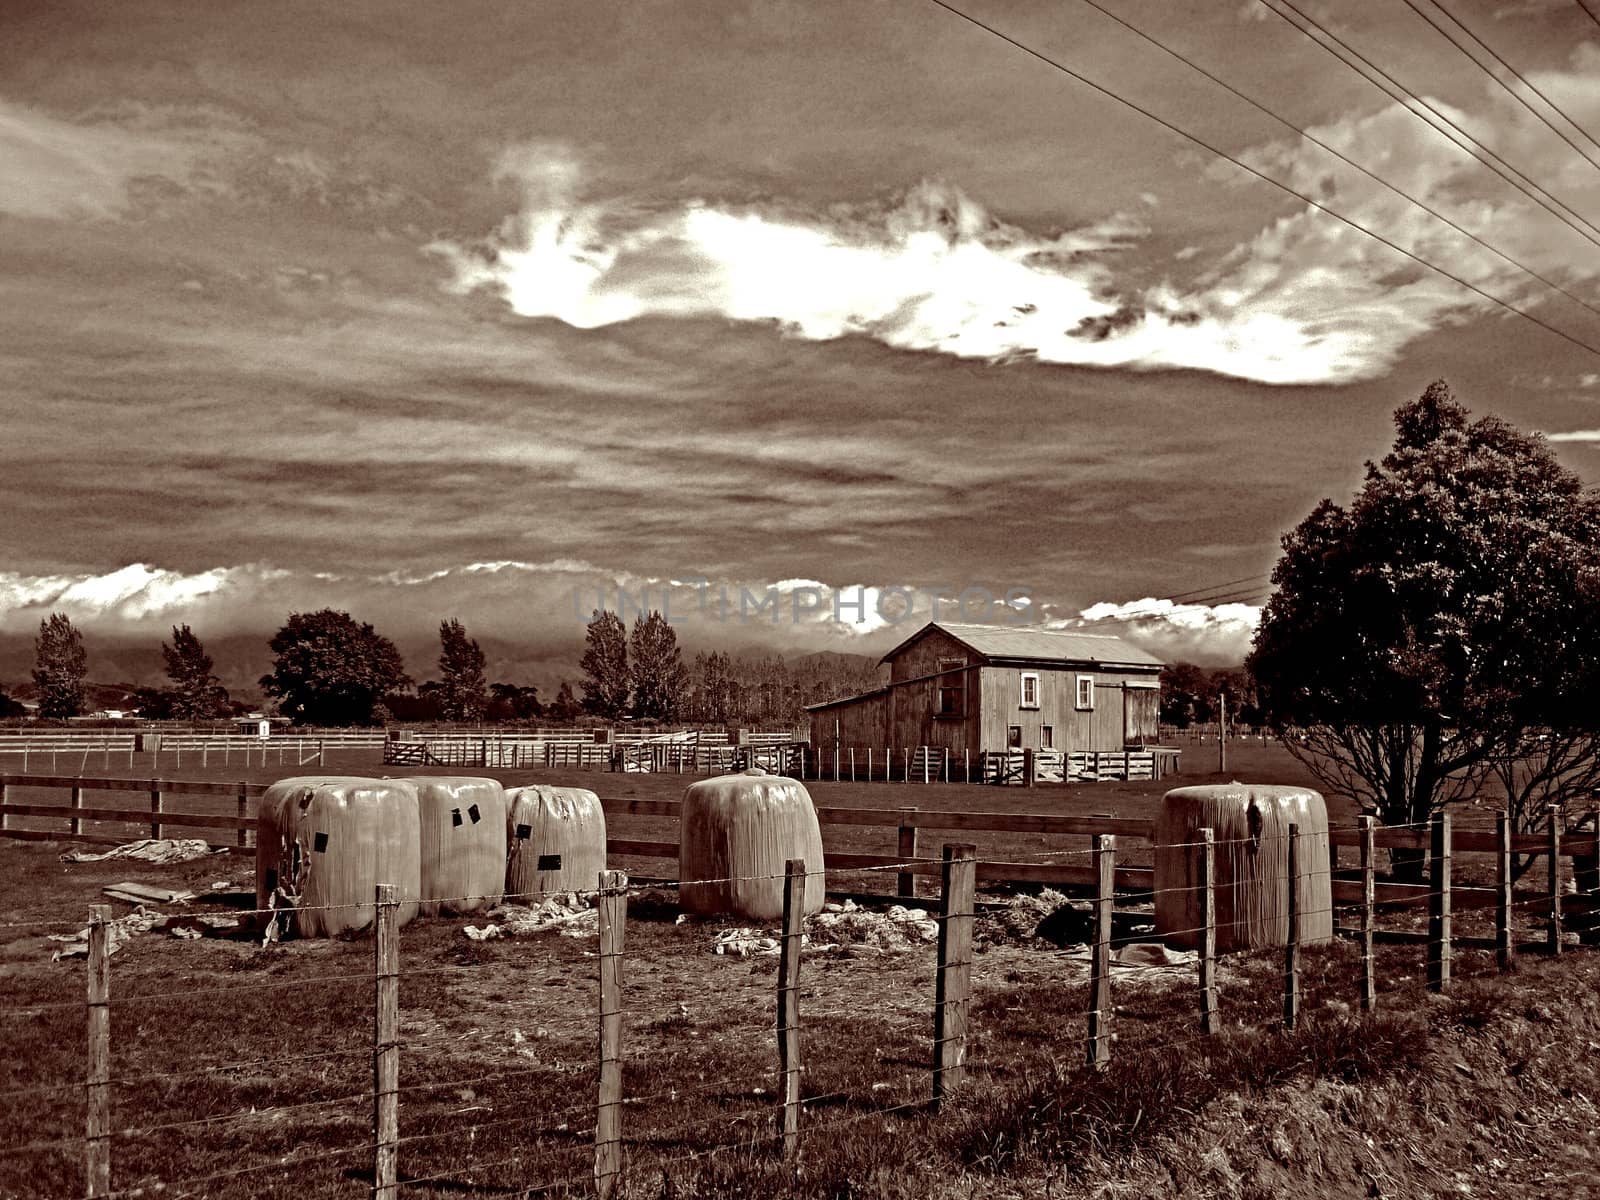 a New Zealand country scene converted to monochrome them split-toned for clarity